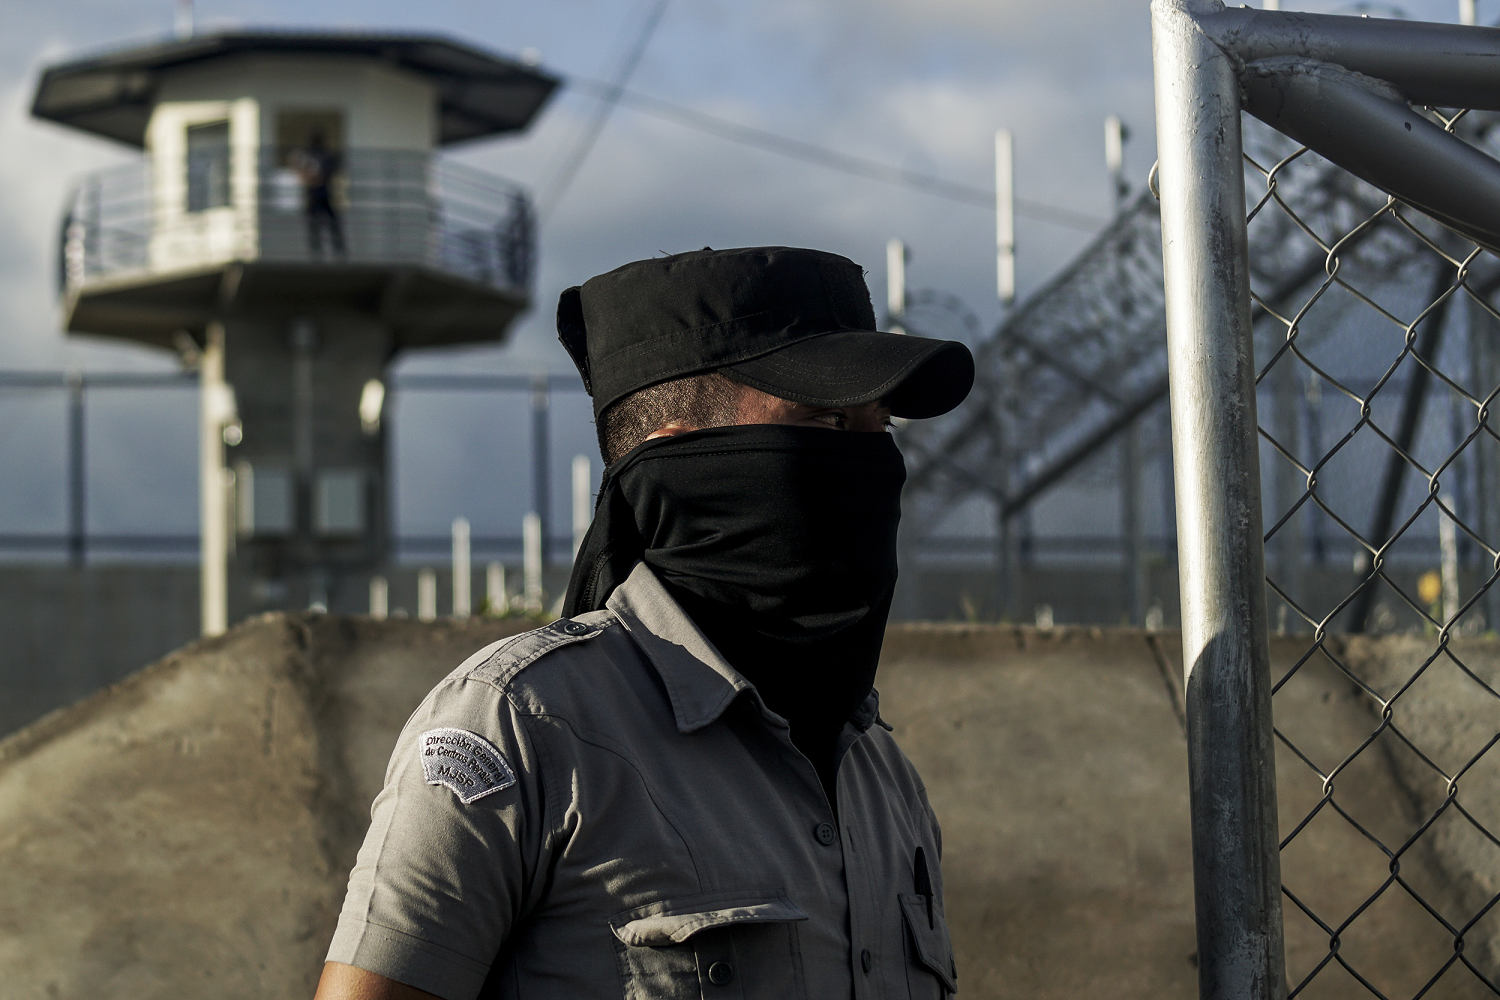 More than 60 children detained, beaten and tortured in El Salvador, rights group says